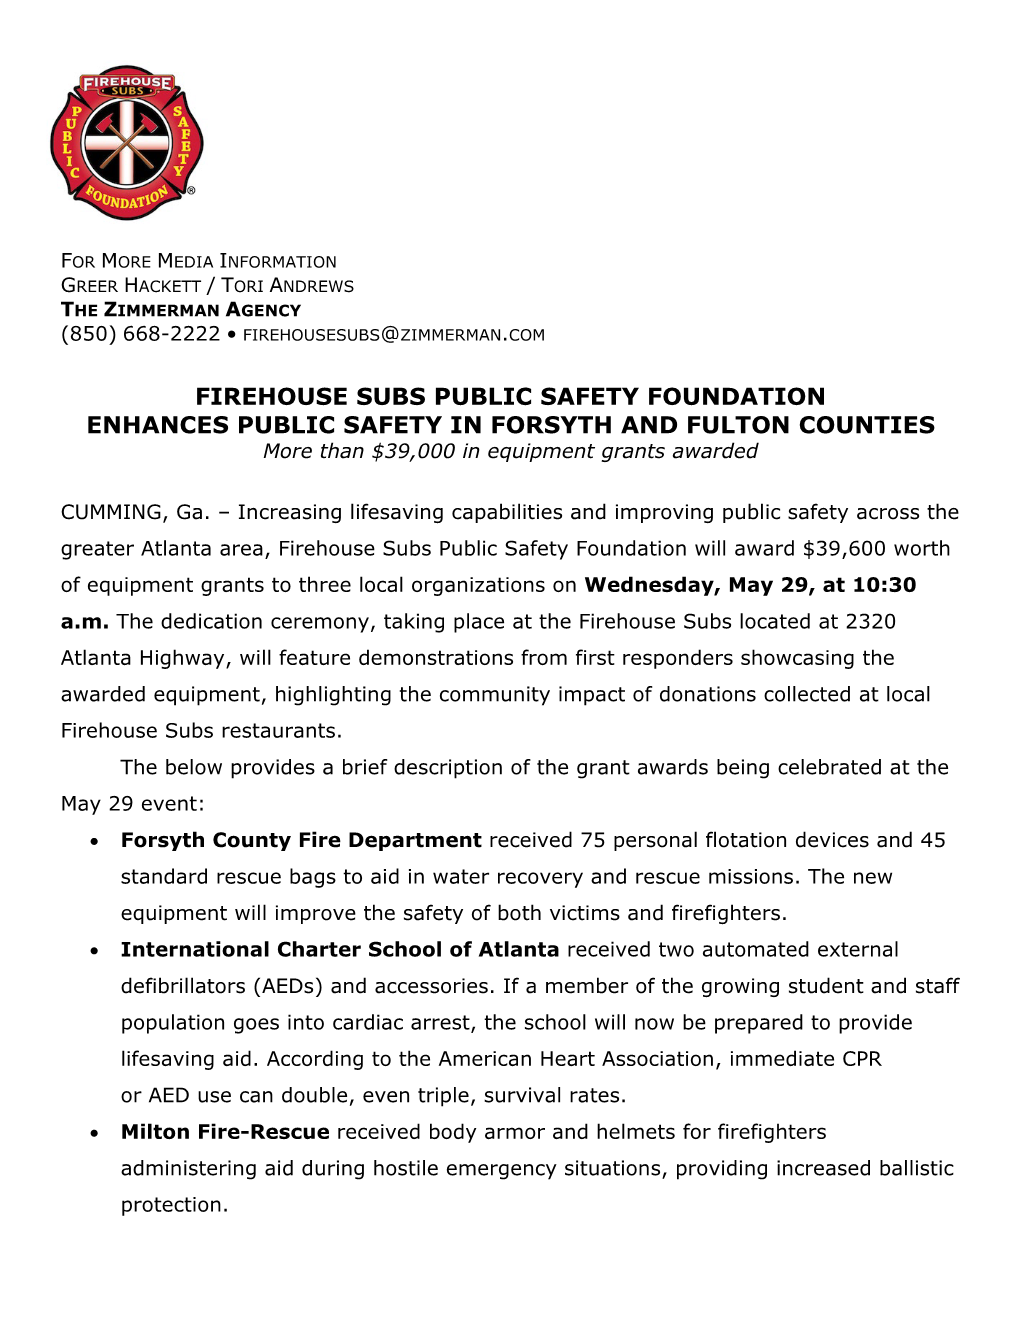 FIREHOUSE SUBS PUBLIC SAFETY FOUNDATION ENHANCES PUBLIC SAFETY in FORSYTH and FULTON COUNTIES More Than $39,000 in Equipment Grants Awarded